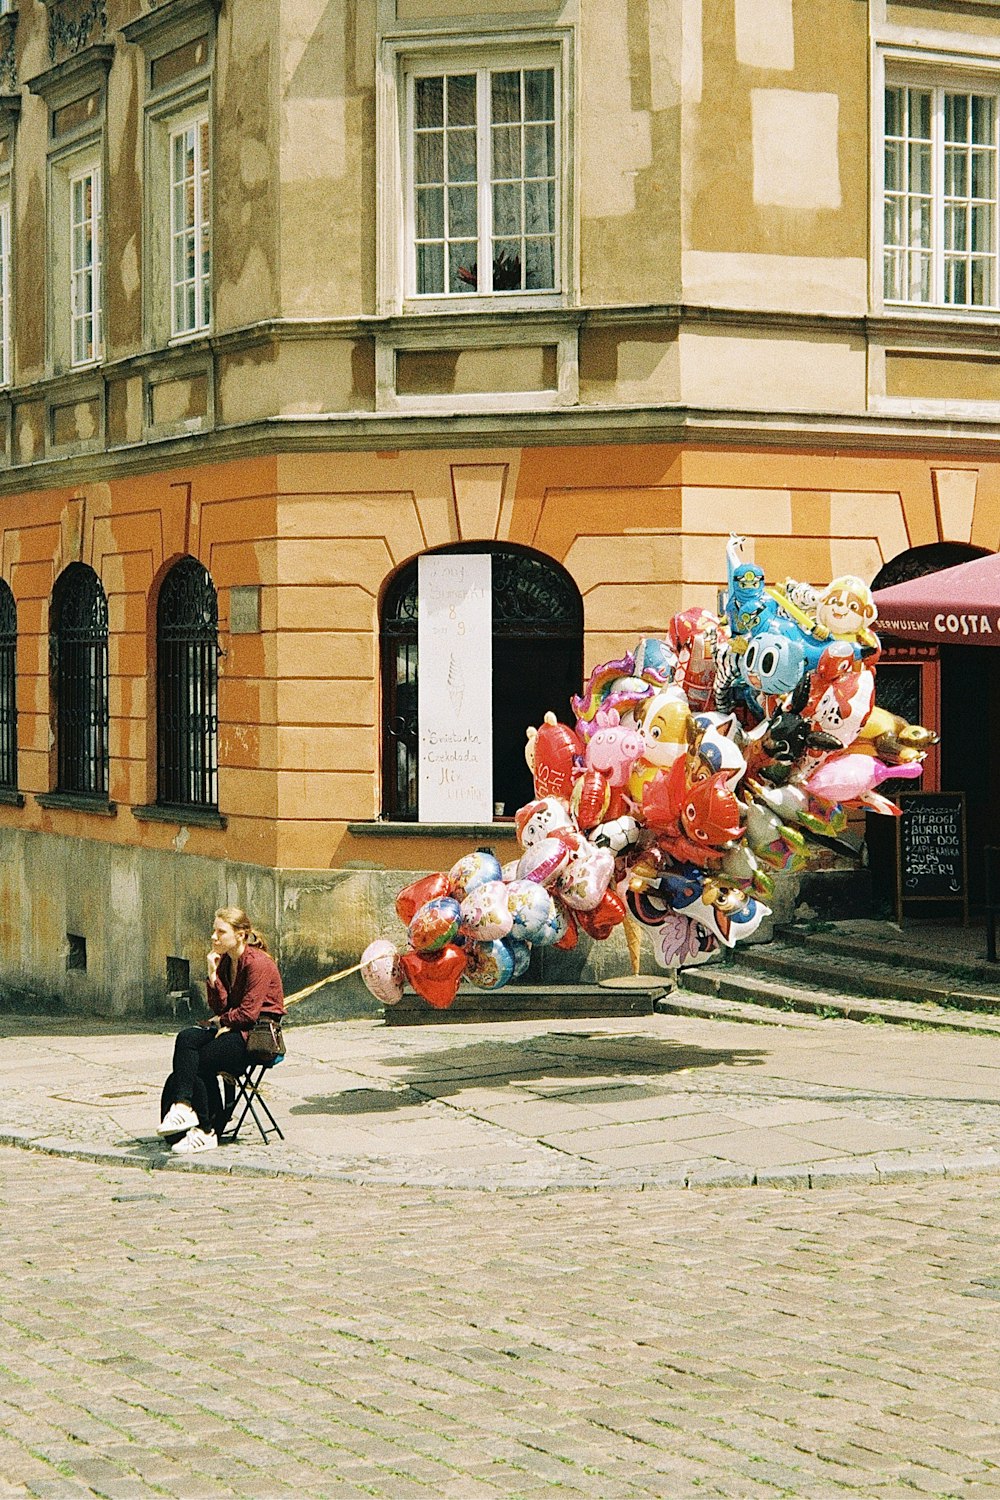 a person sitting on a sidewalk with a dog and a large pile of balloons